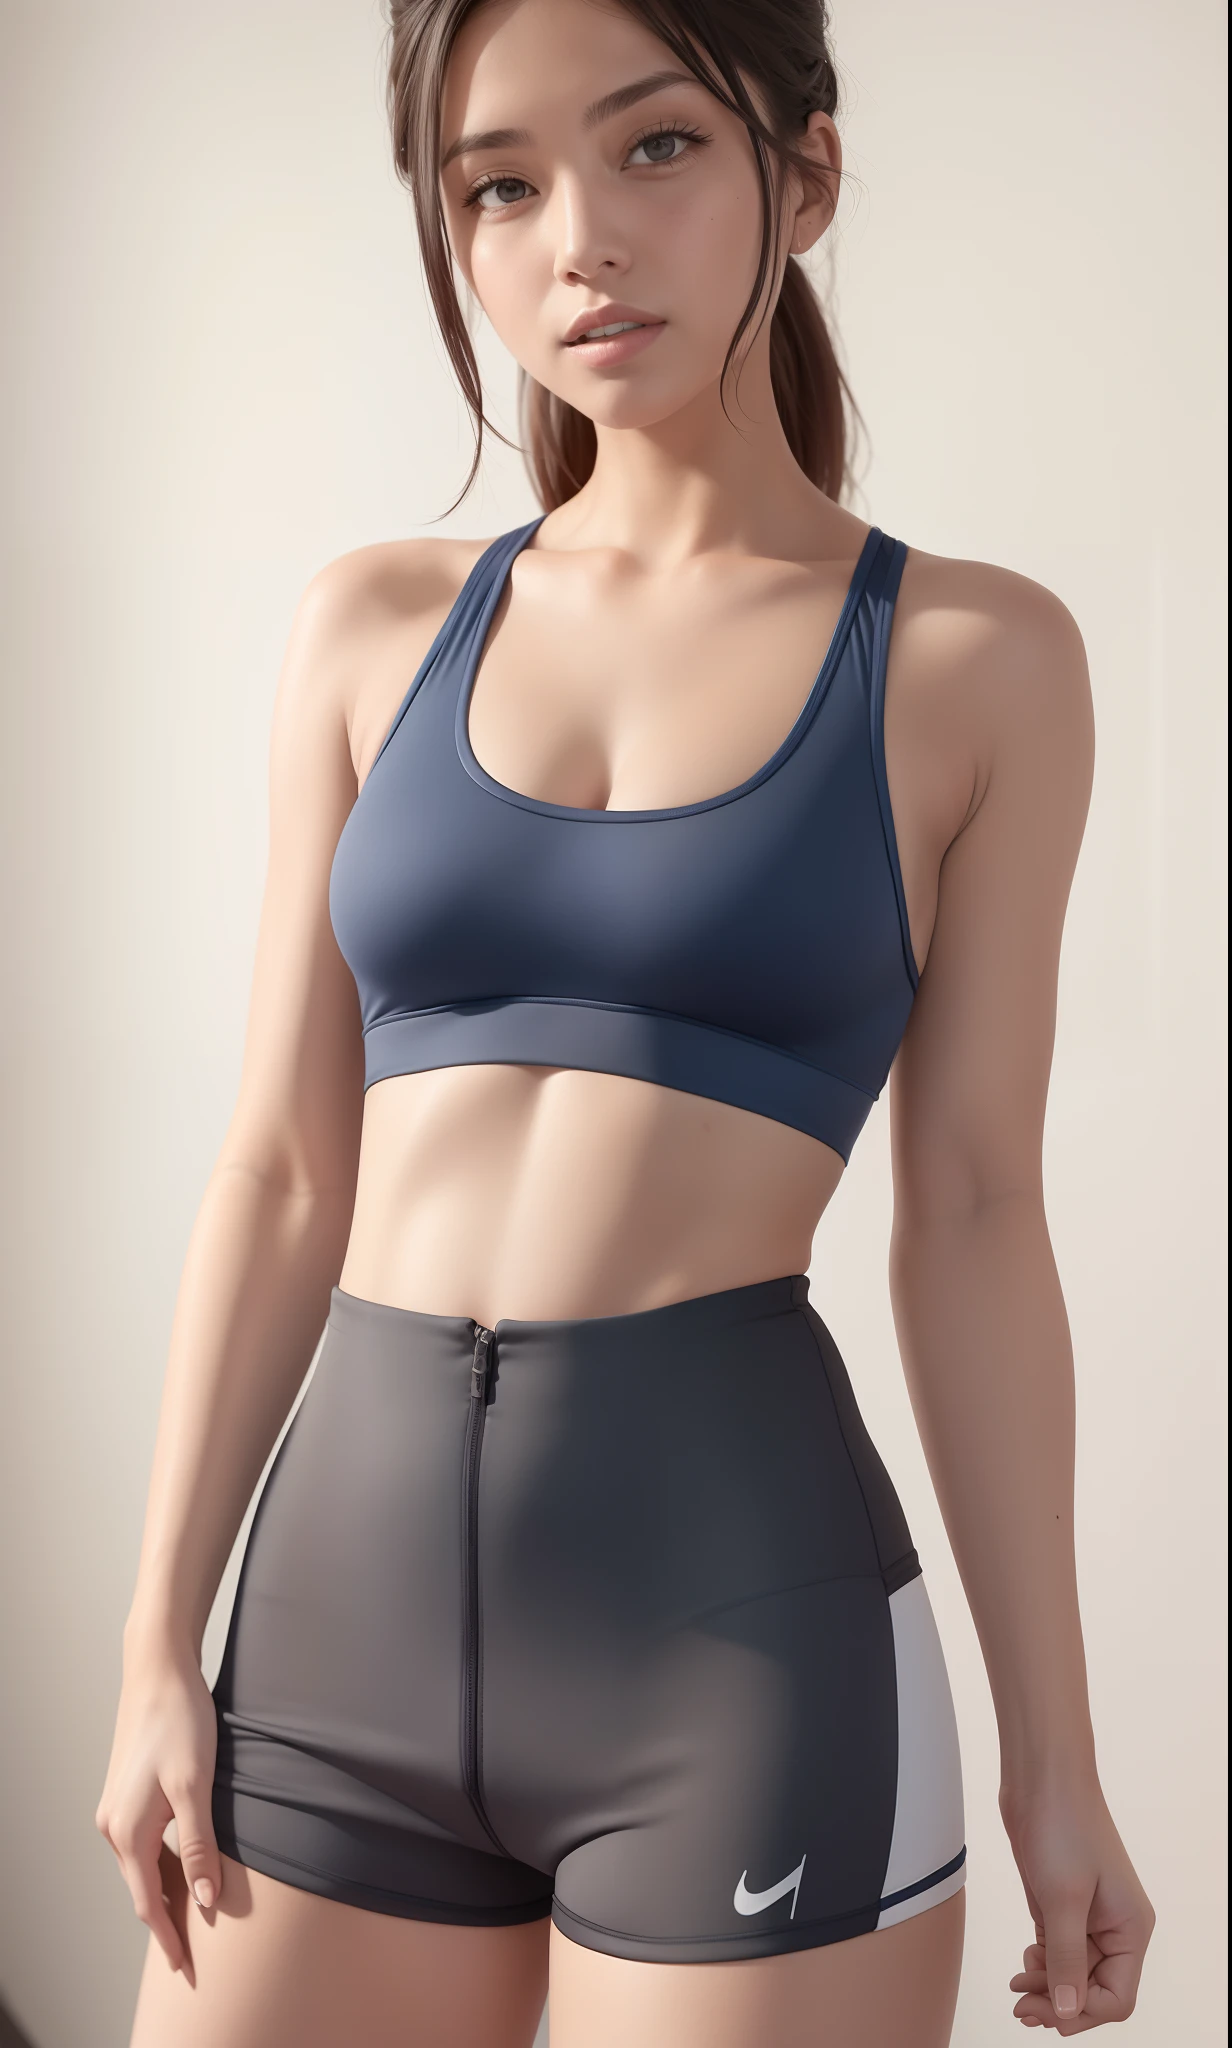 A closeup of a gorgeous woman in a sports bra top and shorts